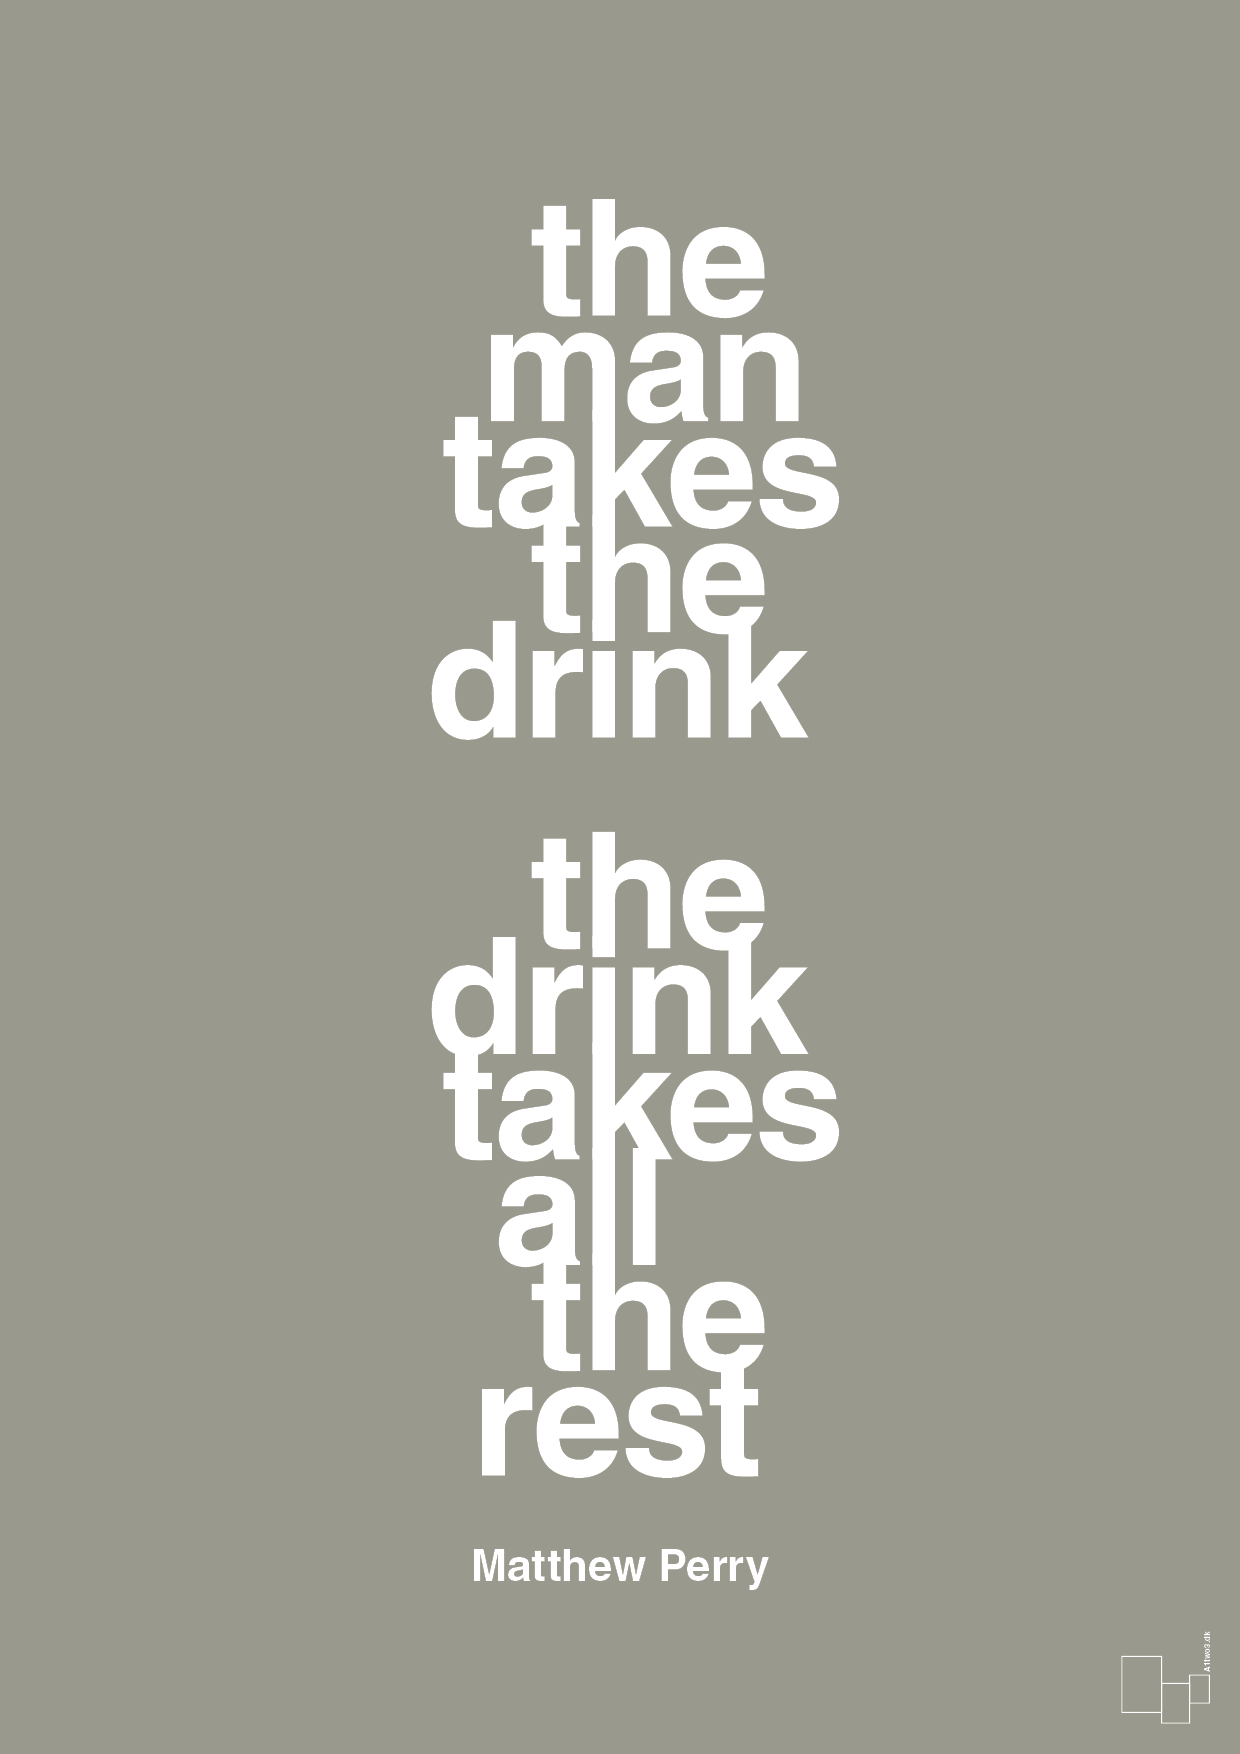 the man takes the drink the drink takes all the rest - Plakat med Citater i Battleship Gray